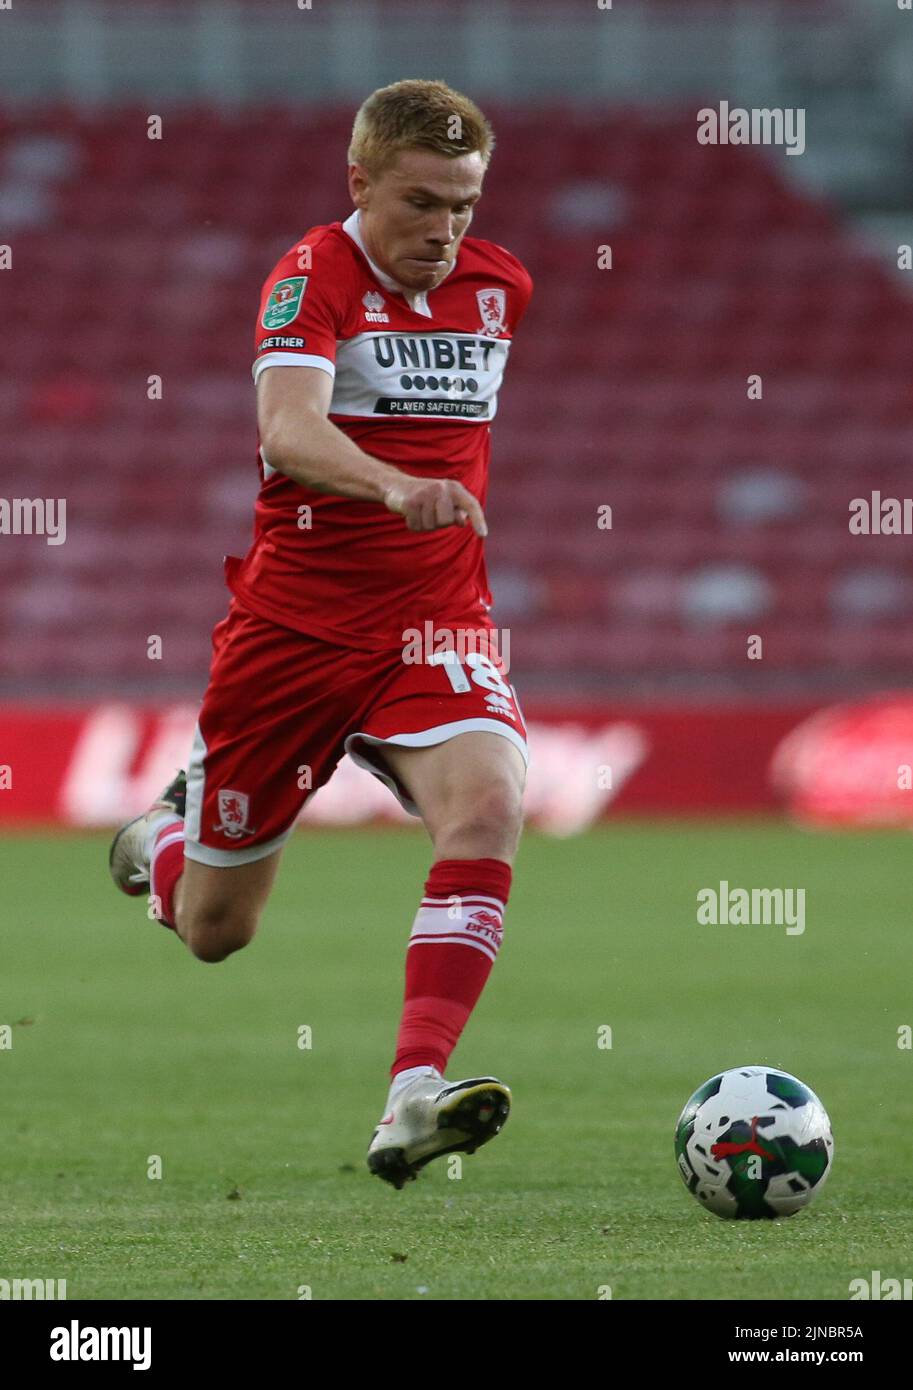 Middlesbrough, UK. 10th August, 2022. Middlesbrough's Duncan Watmore runs with the ball during the Carabao Cup match between Middlesbrough and Barnsley at the Riverside Stadium, Middlesbrough on Wednesday 10th August 2022. (Credit: Michael Driver | MI News) Credit: MI News & Sport /Alamy Live News Stock Photo